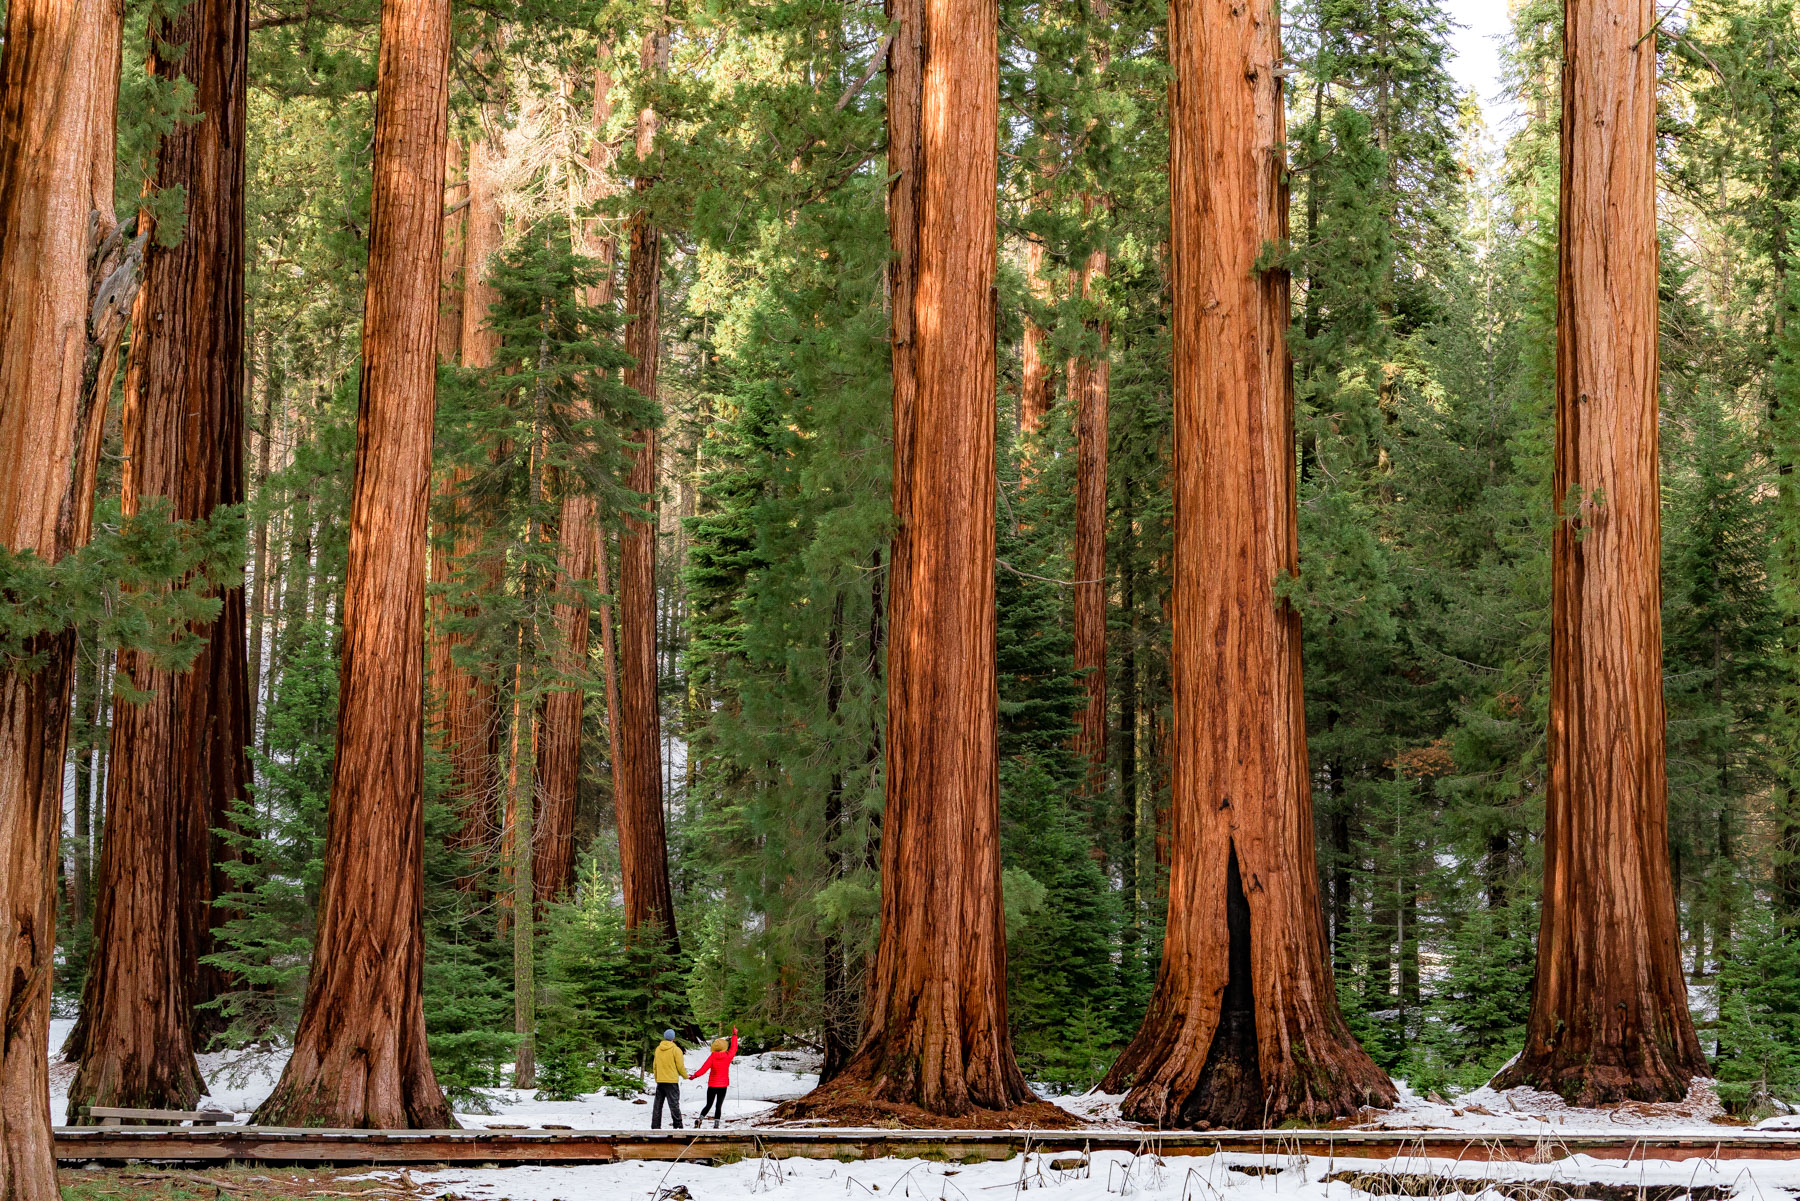 15 EPIC Things to Do at Sequoia National Park (Photos + Tips)